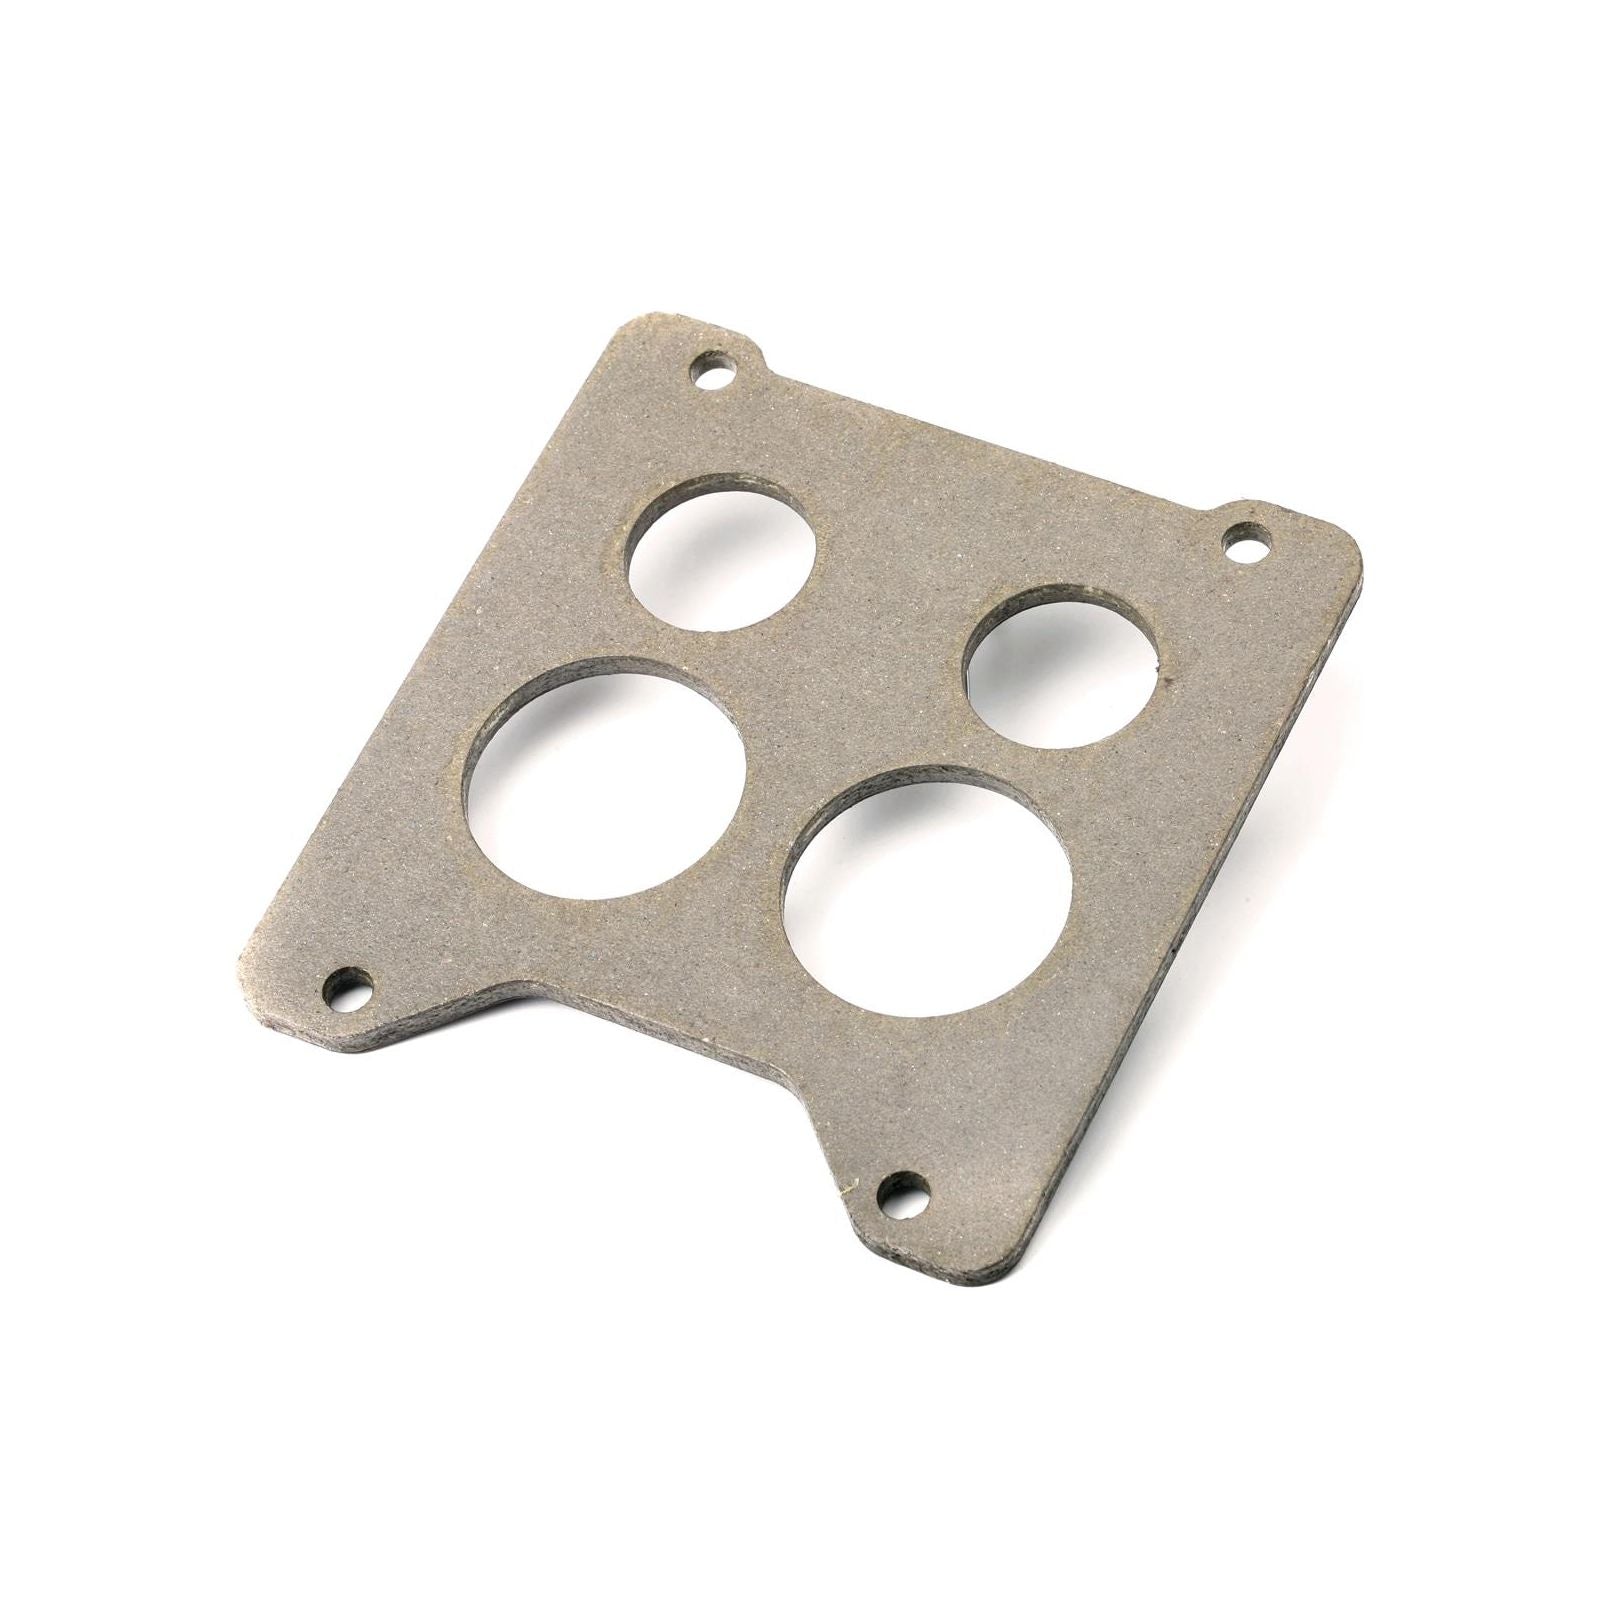 Holley 1 3/8 in. 1/4 in. Thick Base Gasket for Holley 4165/4175 108-118